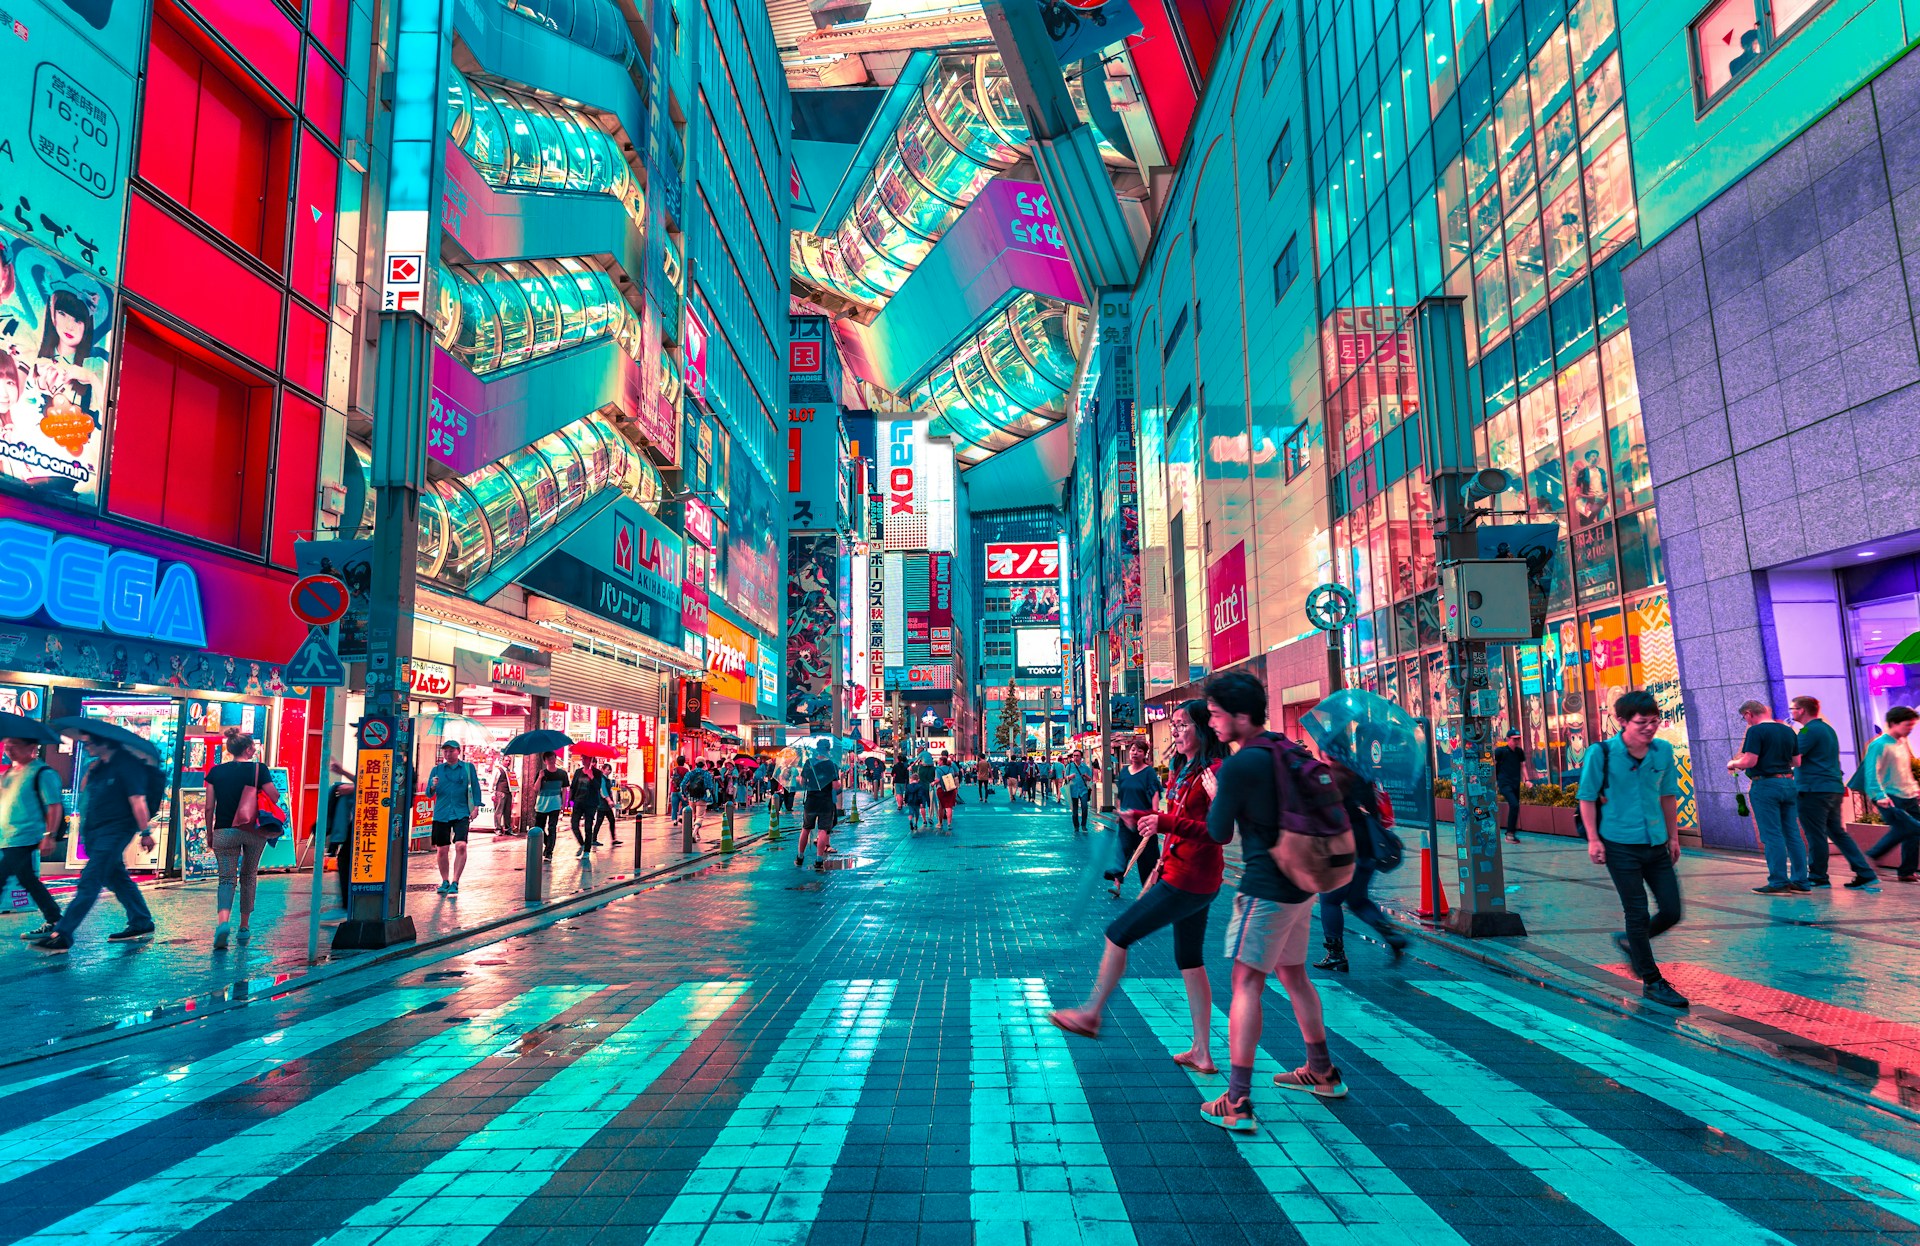 <p>Tokyo's has a mix of traditional attractions like ancient temples to modern skyscrapers that tower over the city. The city is famous for its for its distinct culinary options, use of technology, and unique pop culture.</p>